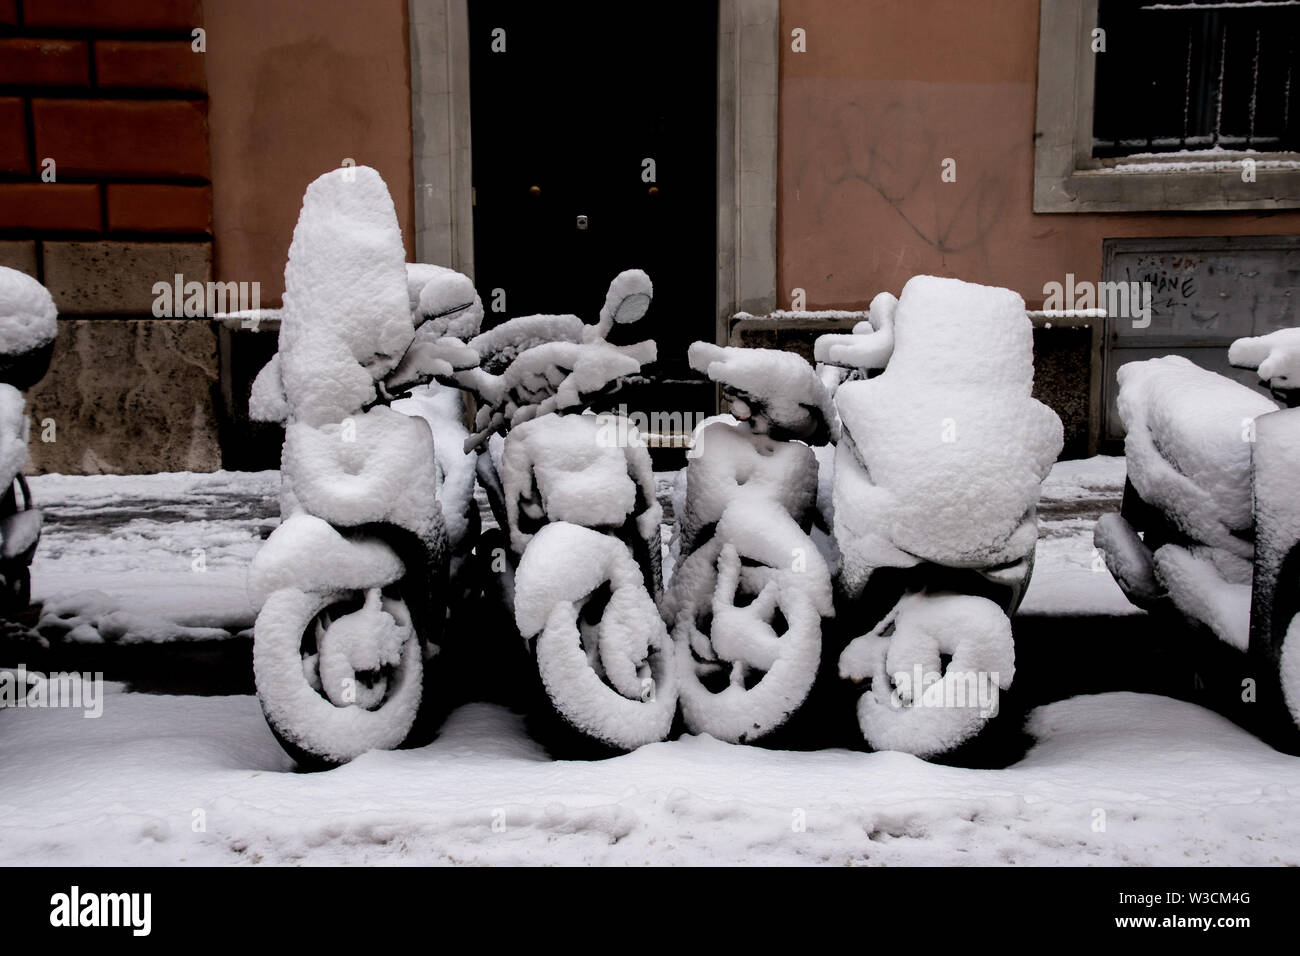 The streets of Rome, Italy turned into a winter wonderland after a heavy snow fall. Stock Photo